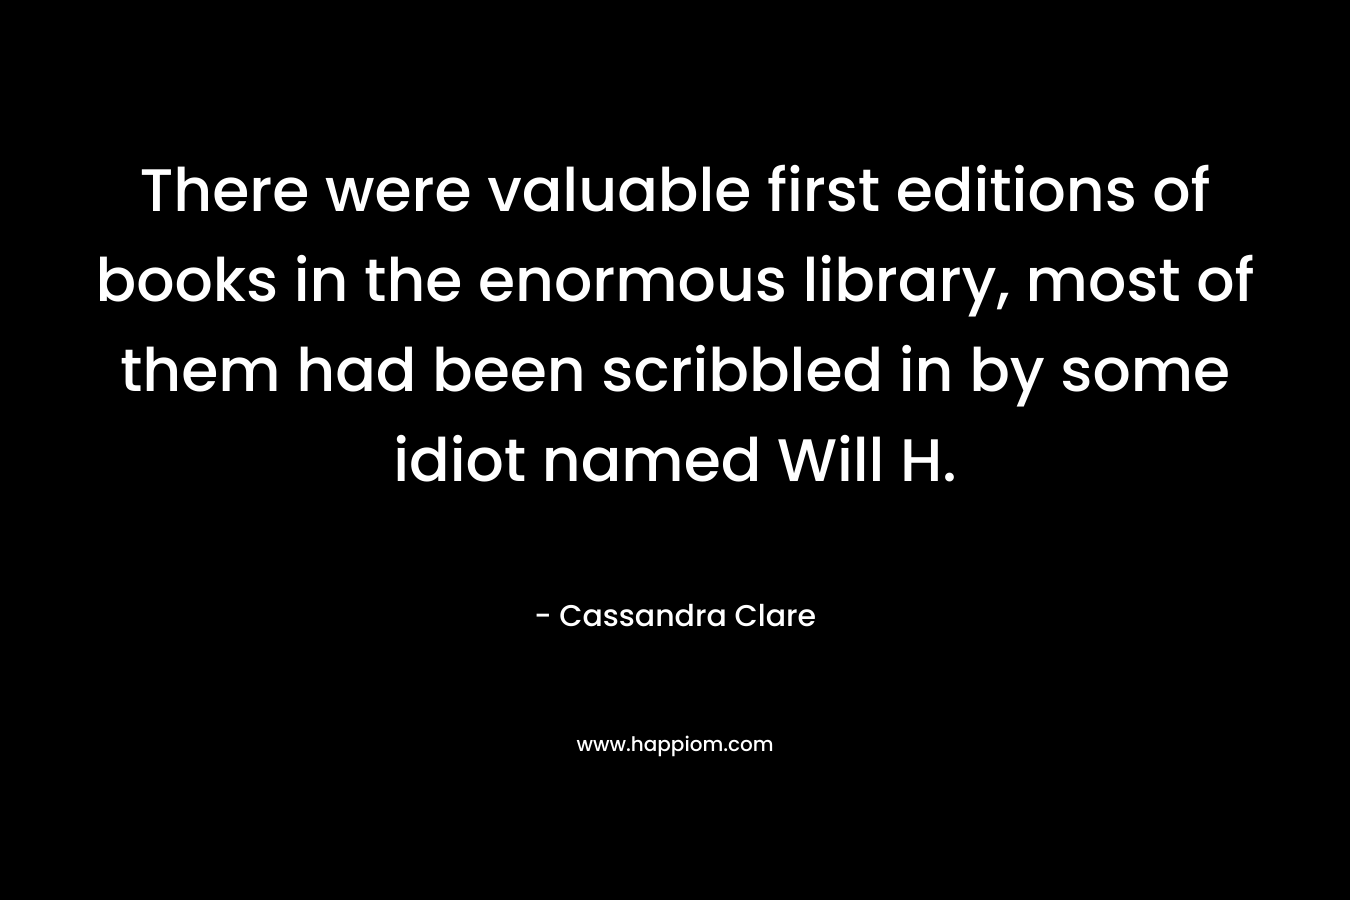 There were valuable first editions of books in the enormous library, most of them had been scribbled in by some idiot named Will H. – Cassandra Clare